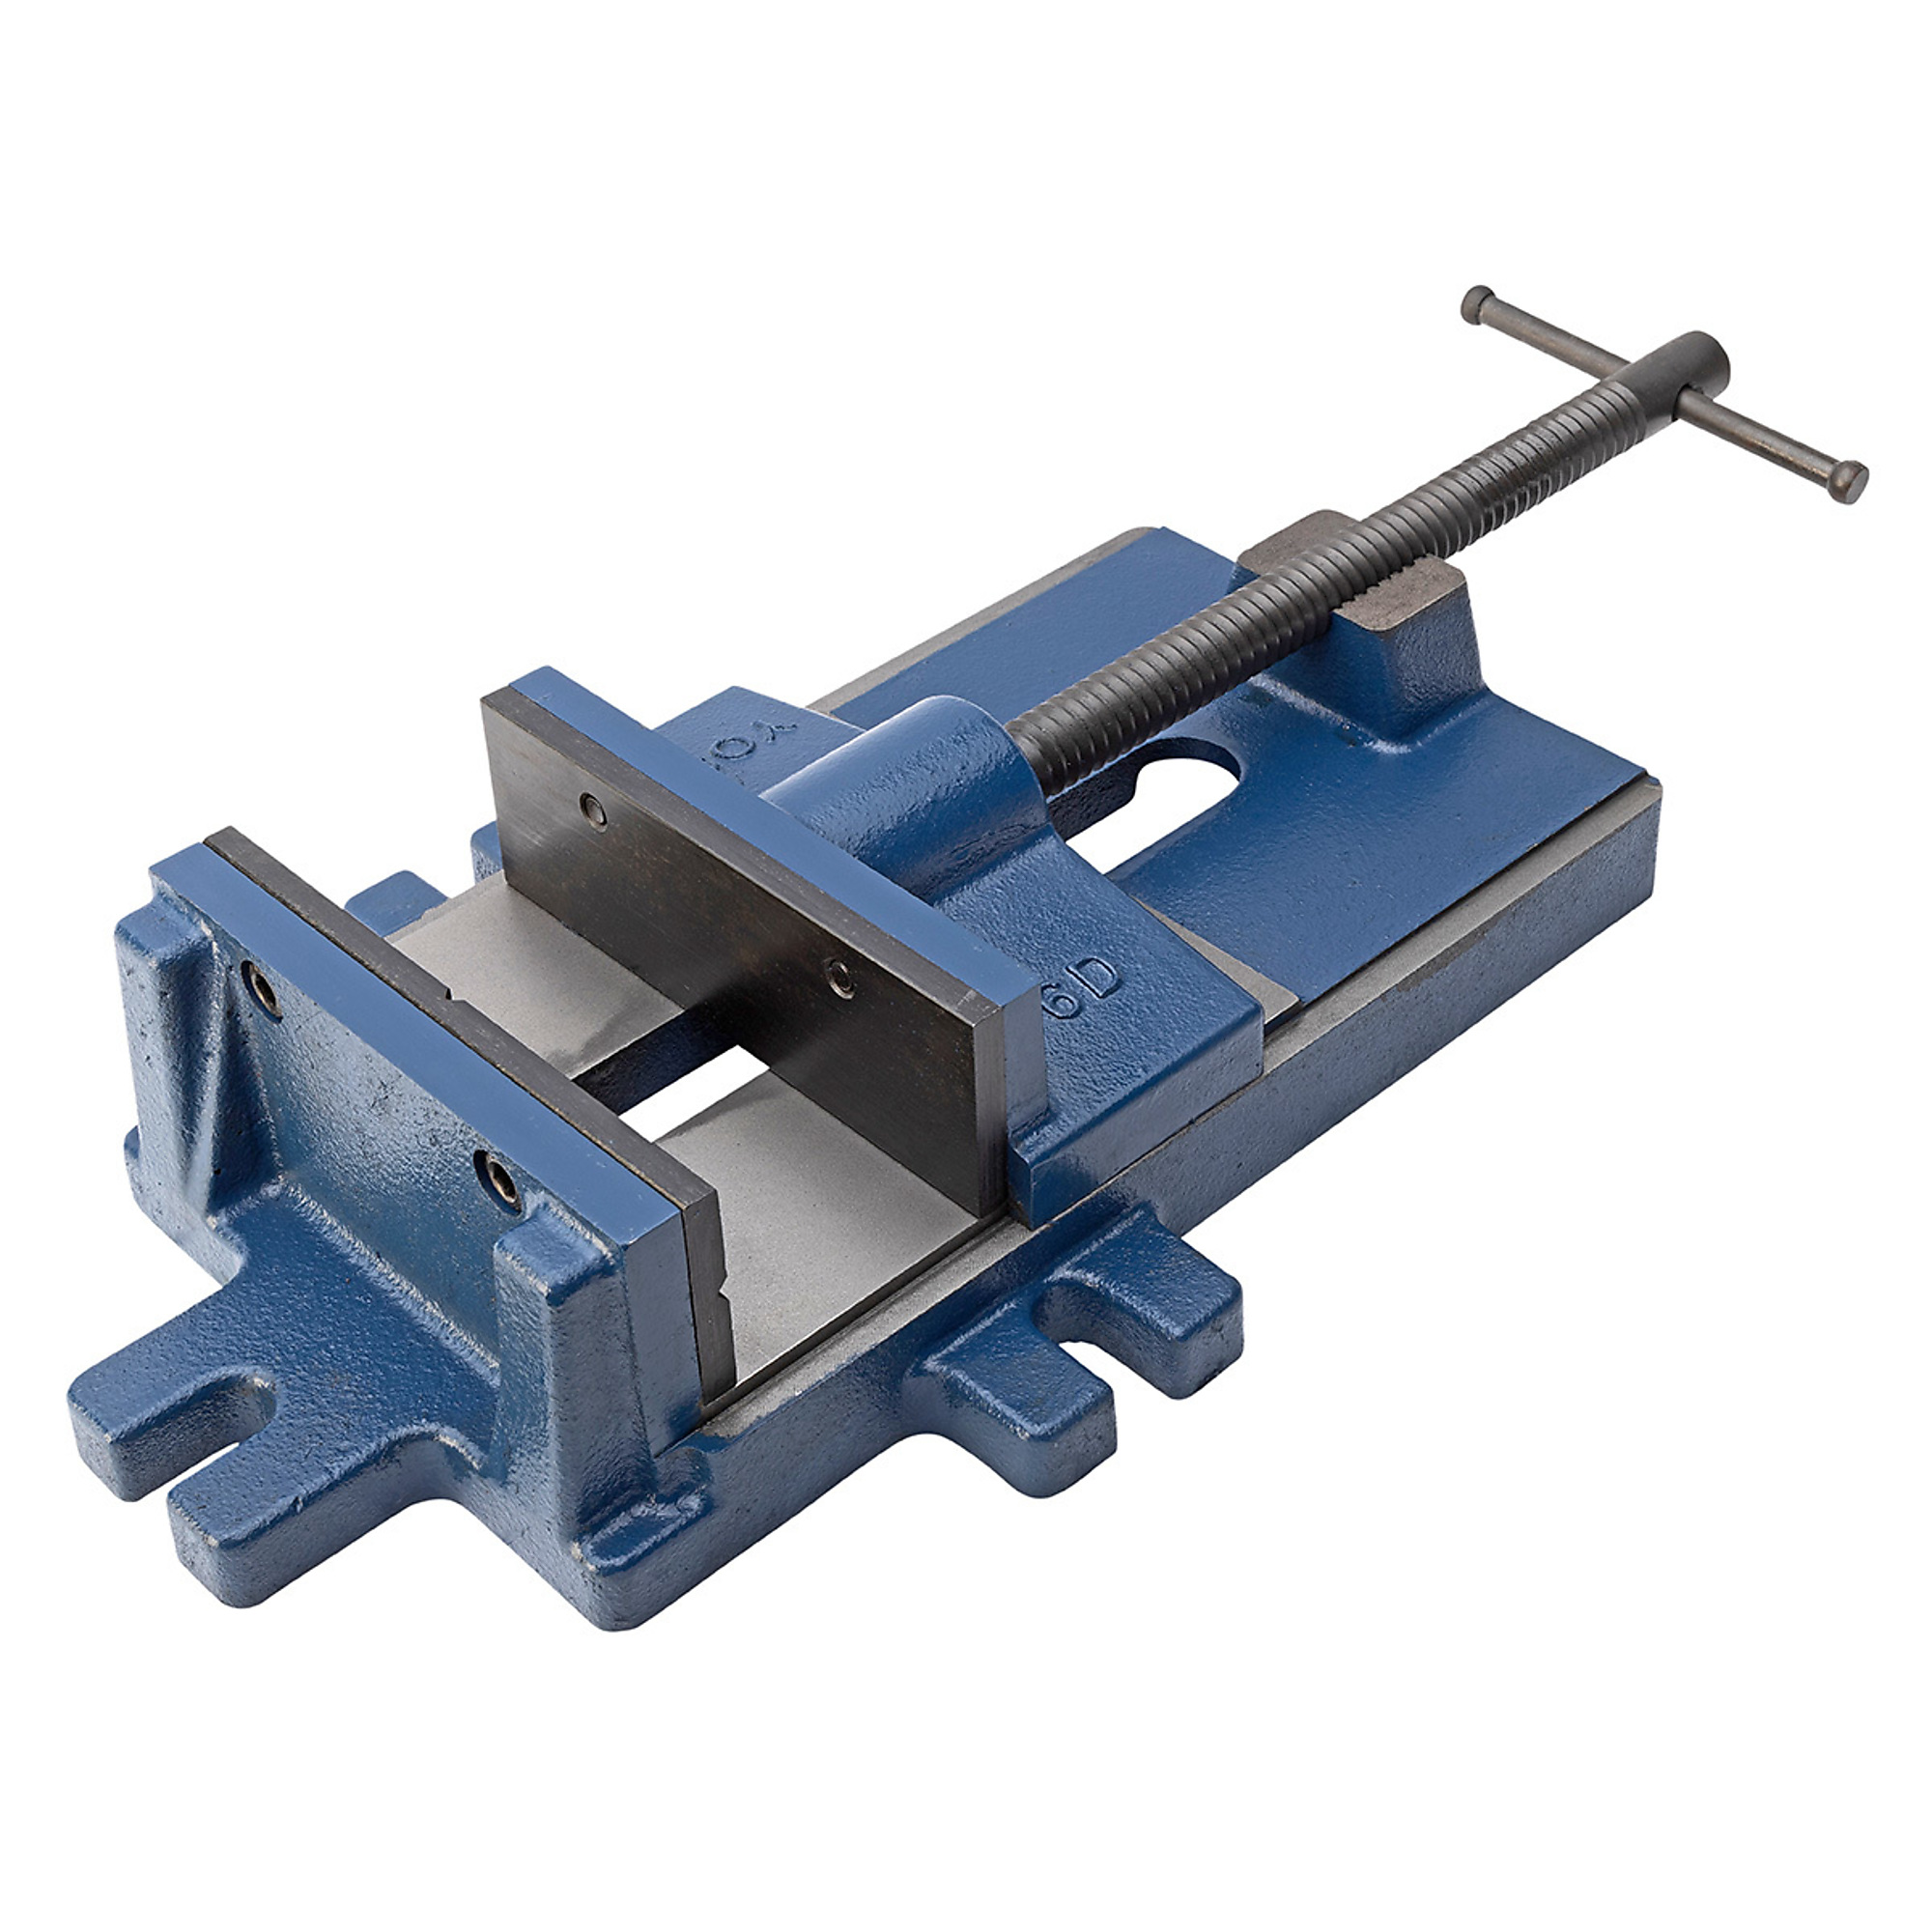 Yost Vises, 6Inch HD Drill Press Vise, Jaw Width 6 in, Jaw Capacity 6 in, Material Cast Iron, Model 6D-QR -  56480